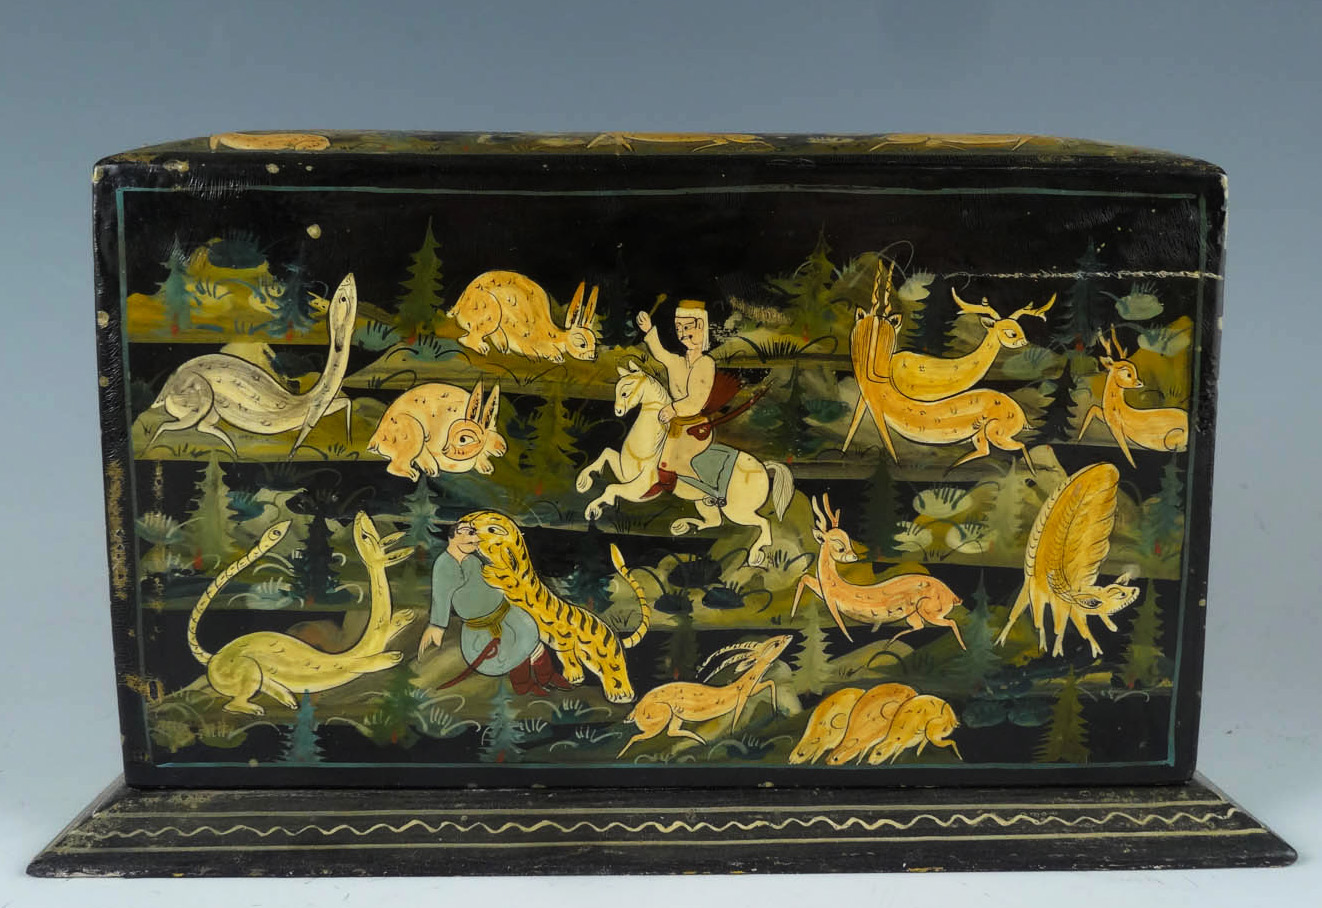 Antique Painted Lacquer Hunting Scene with Deer, Tiger, Man on Horse